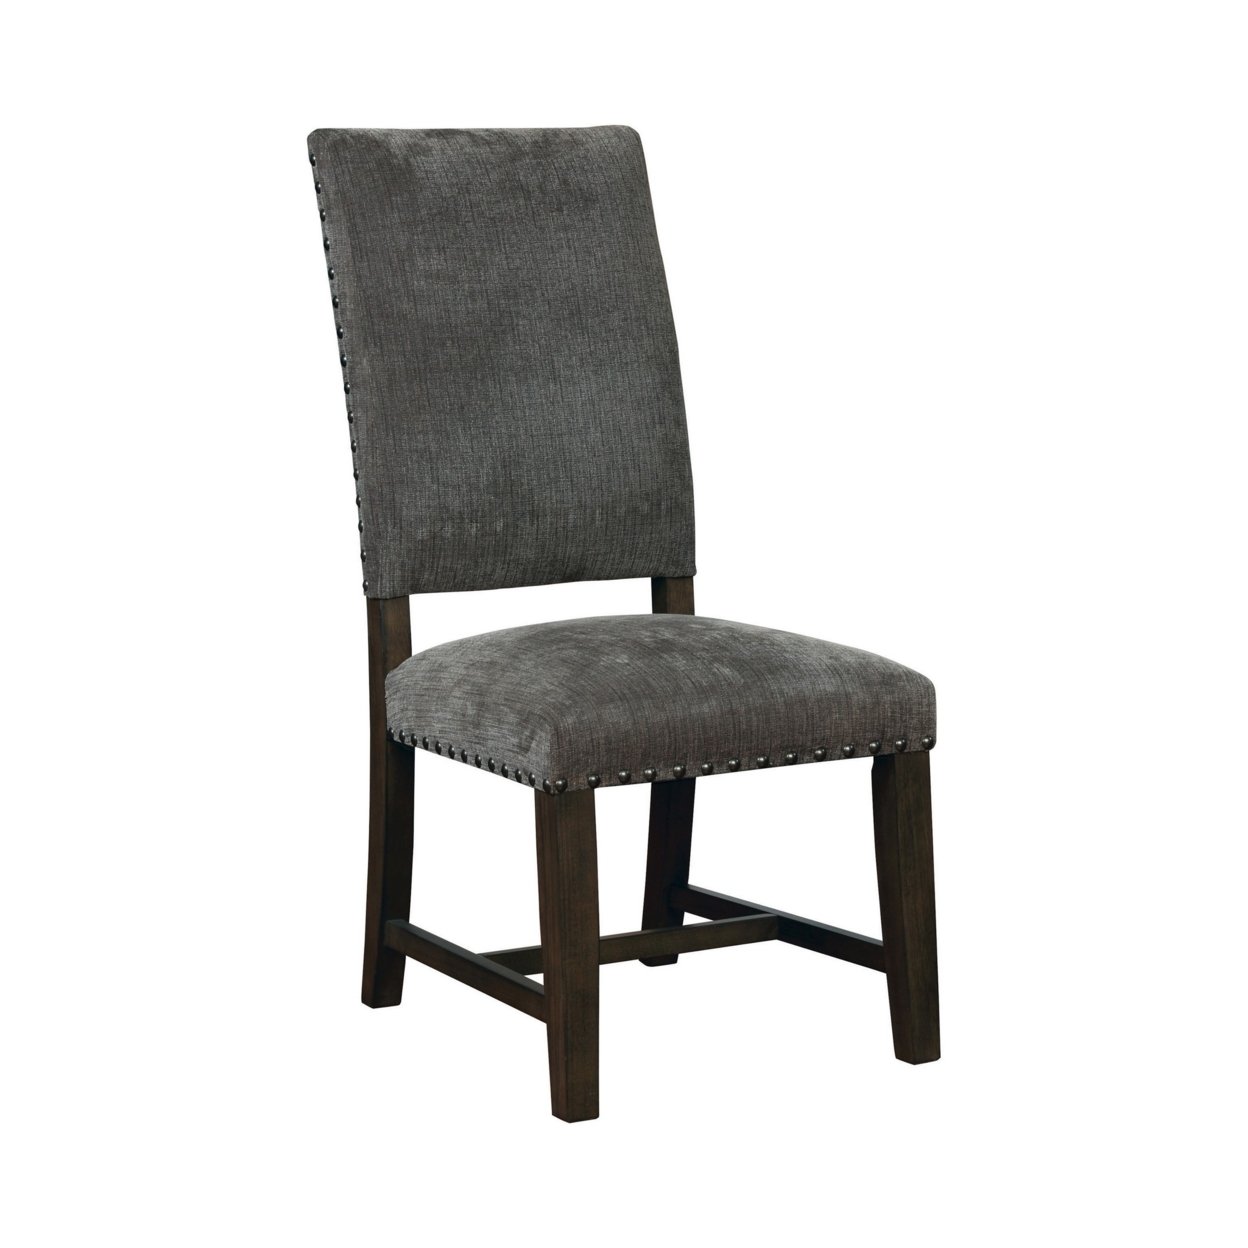 21 Inch Dining Chair, Set Of 2, Gray Vegan Faux Leather, Parson Style - Saltoro Sherpi